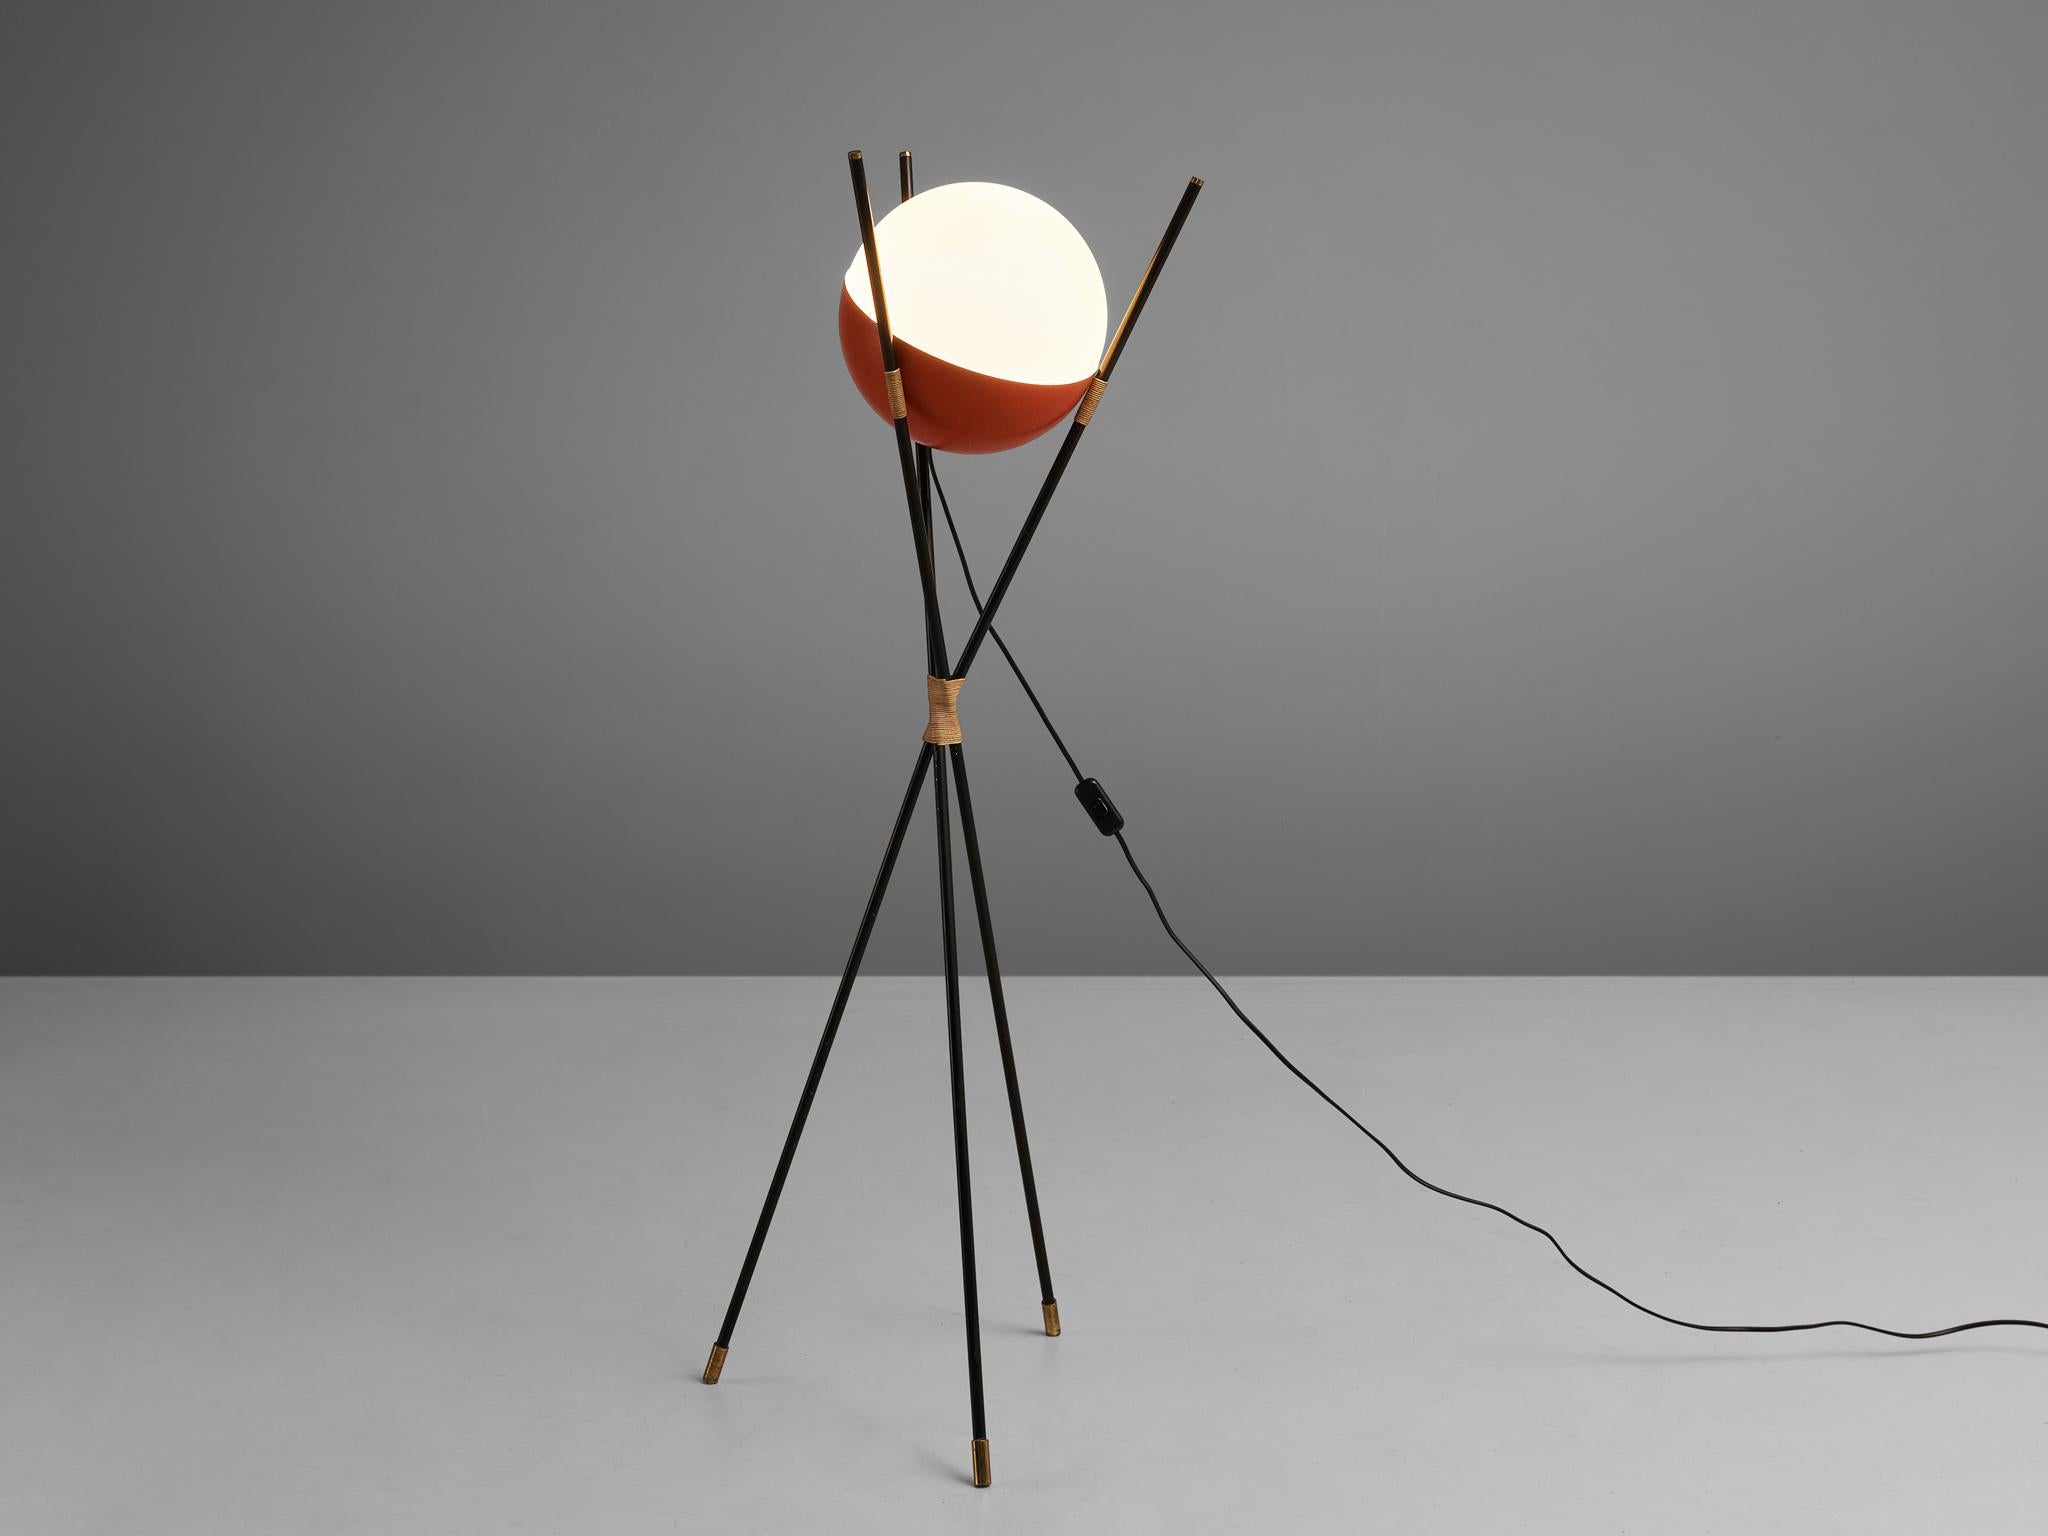 Angelo Brotto for Esperia, floor lamp, brass, metal, opaline glass, cane, Italy, 1960s

Delicate floor lamp by Italian designer Angelo Brotto. A large sphere rests in the center of three thin metal stems with brass ends. These three stems are